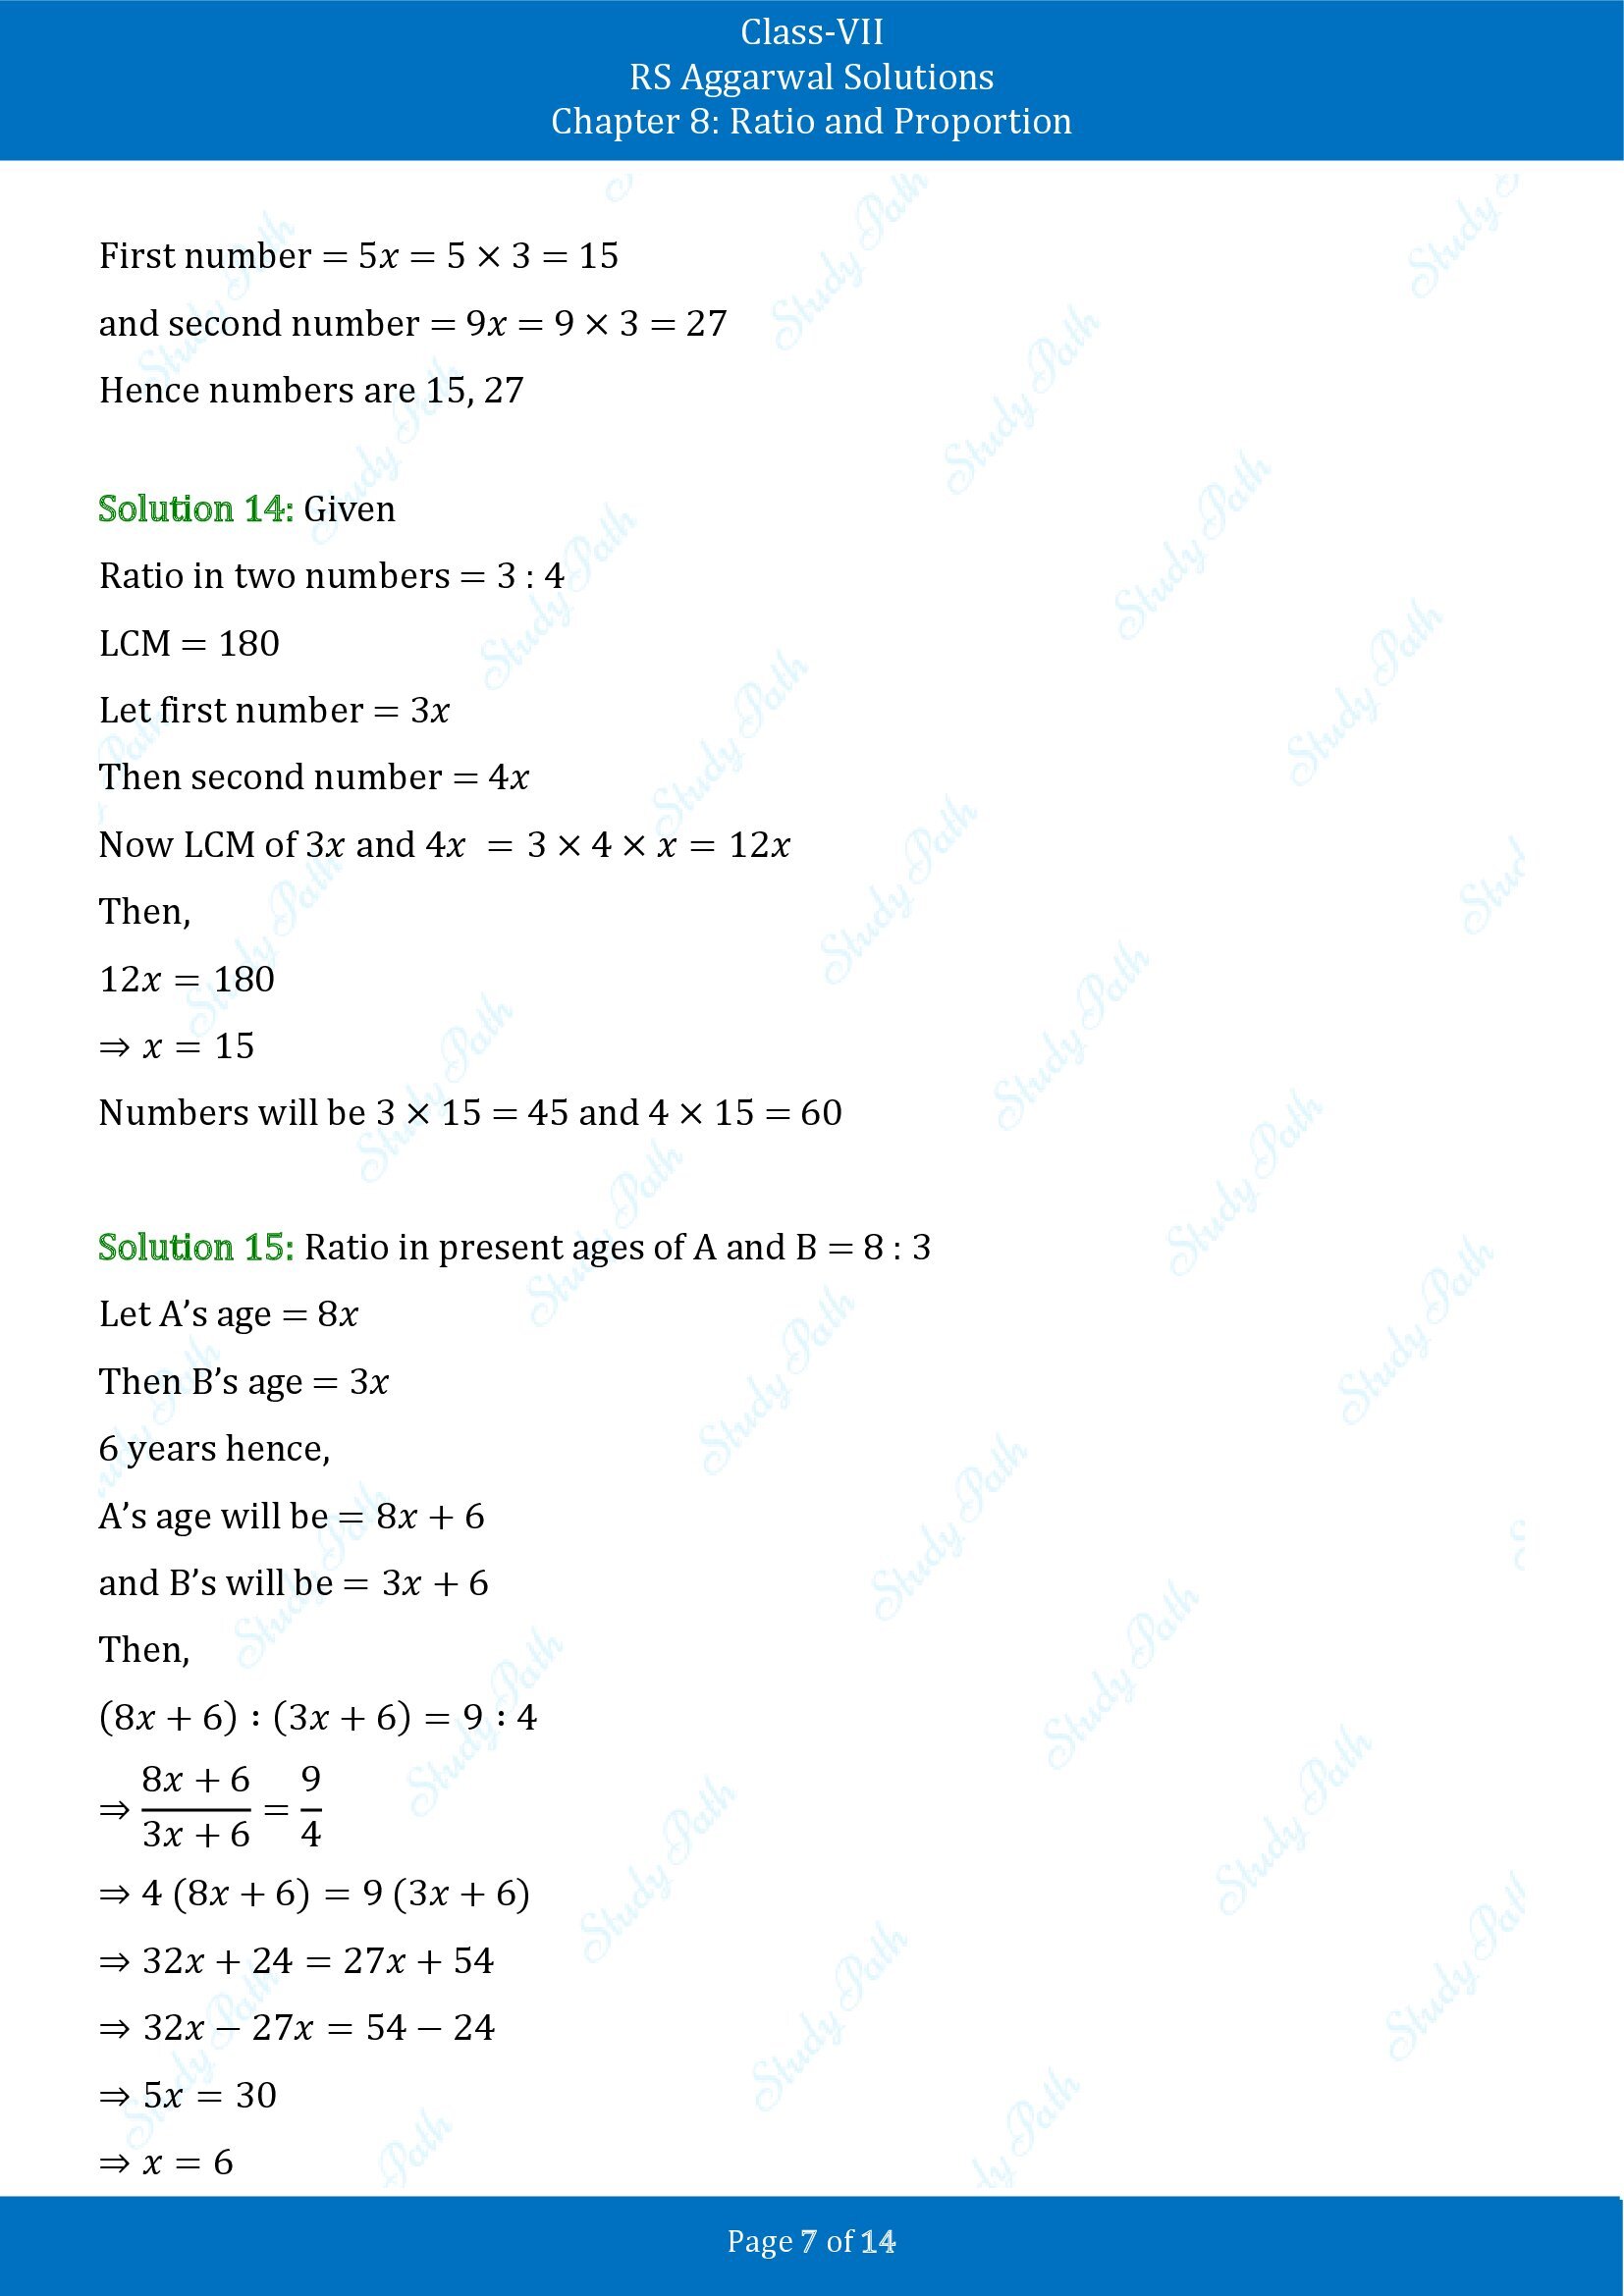 RS Aggarwal Solutions Class 7 Chapter 8 Ratio and Proportion Exercise 8A 00007